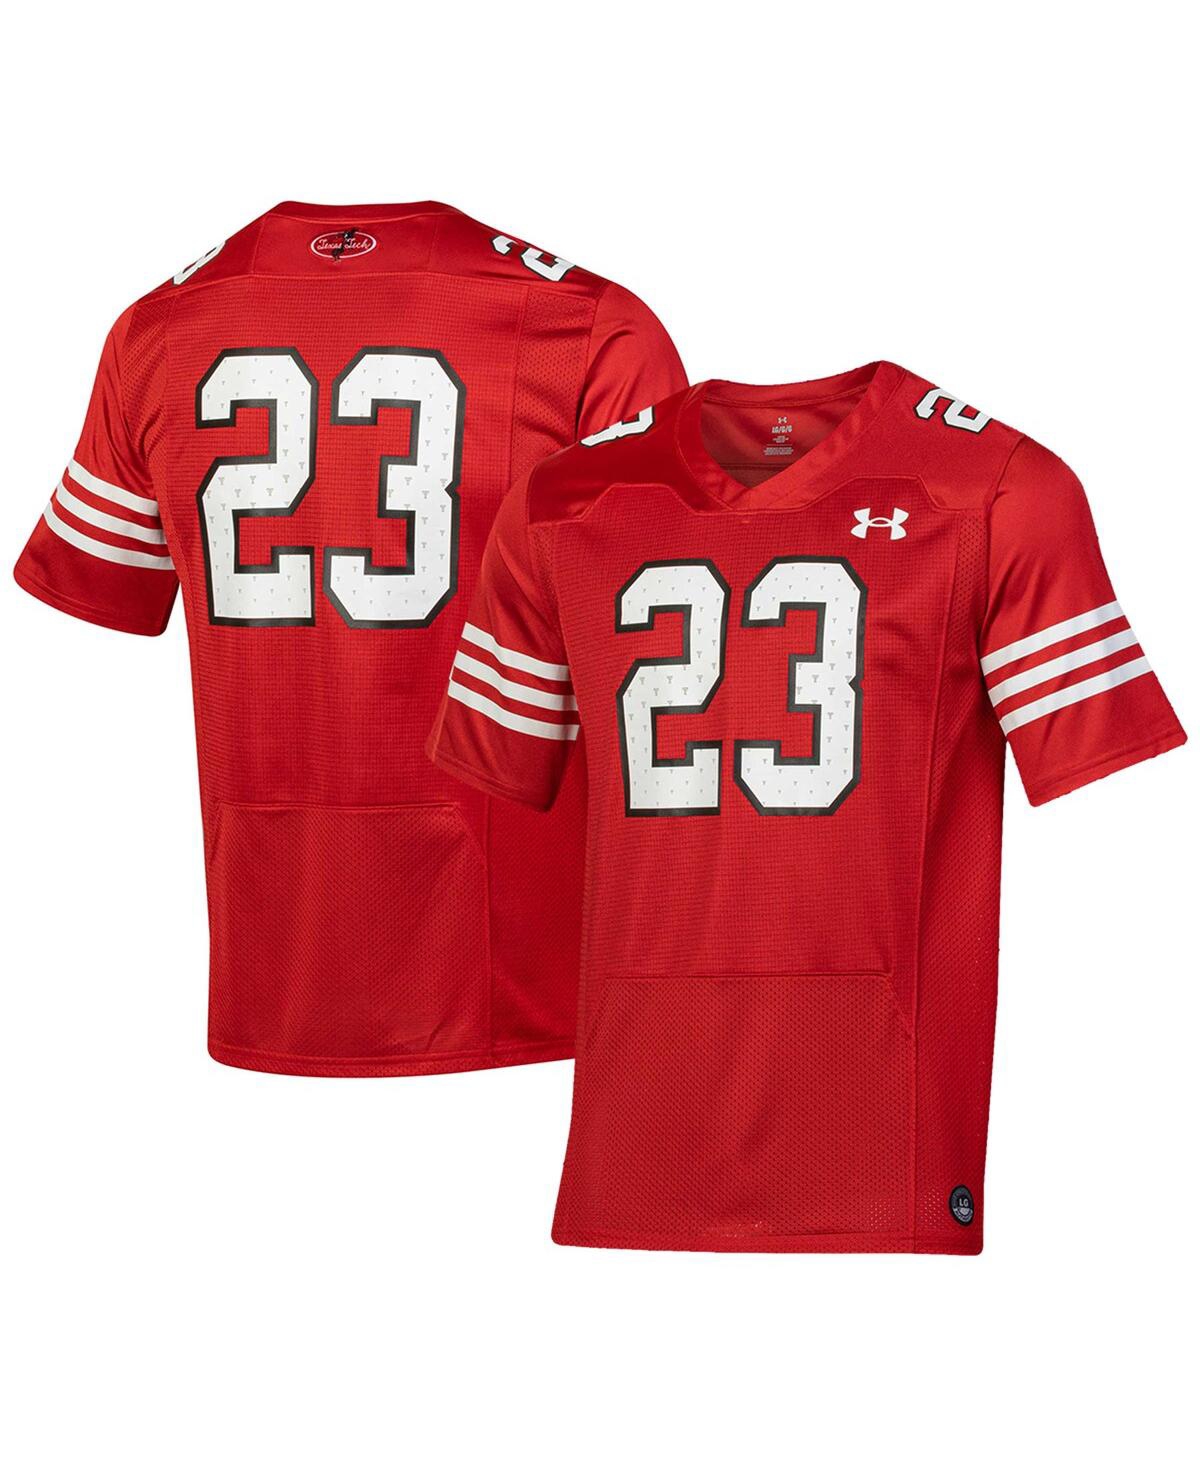 Under Armour Men's  #23 Red Texas Tech Red Raiders Throwback Replica Jersey